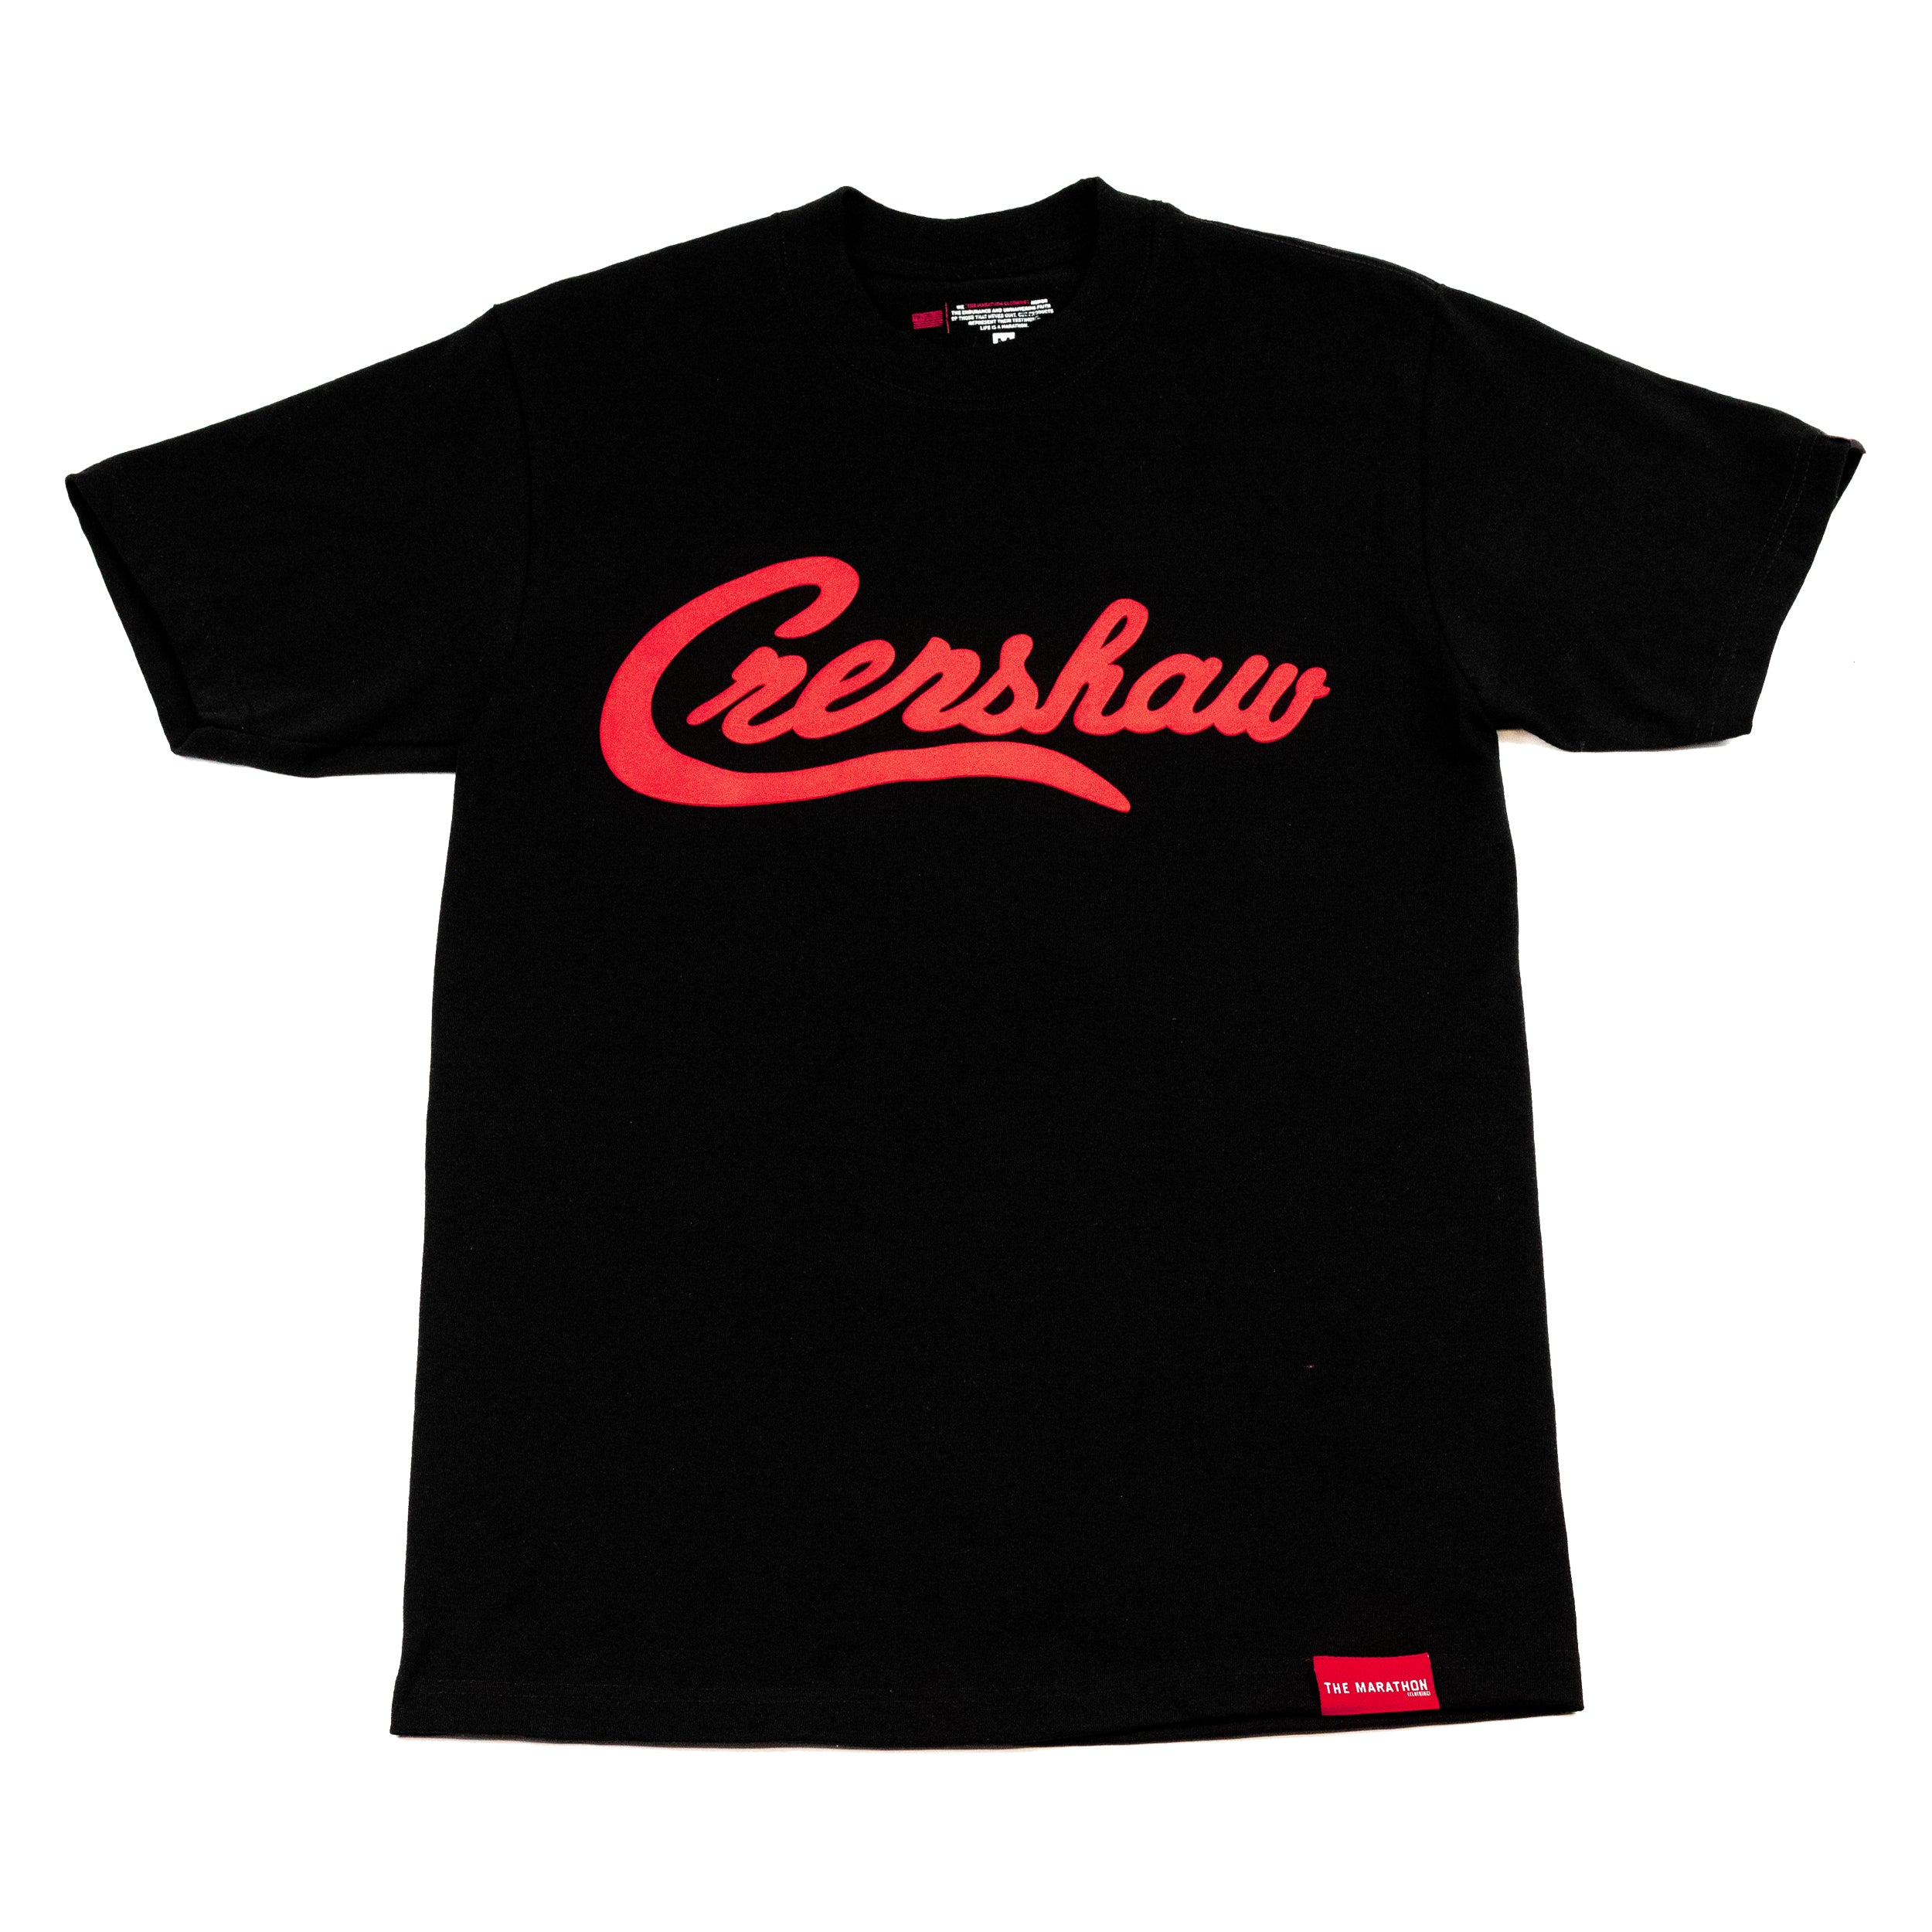 Limited Edition Crenshaw T-Shirt - Black/Red